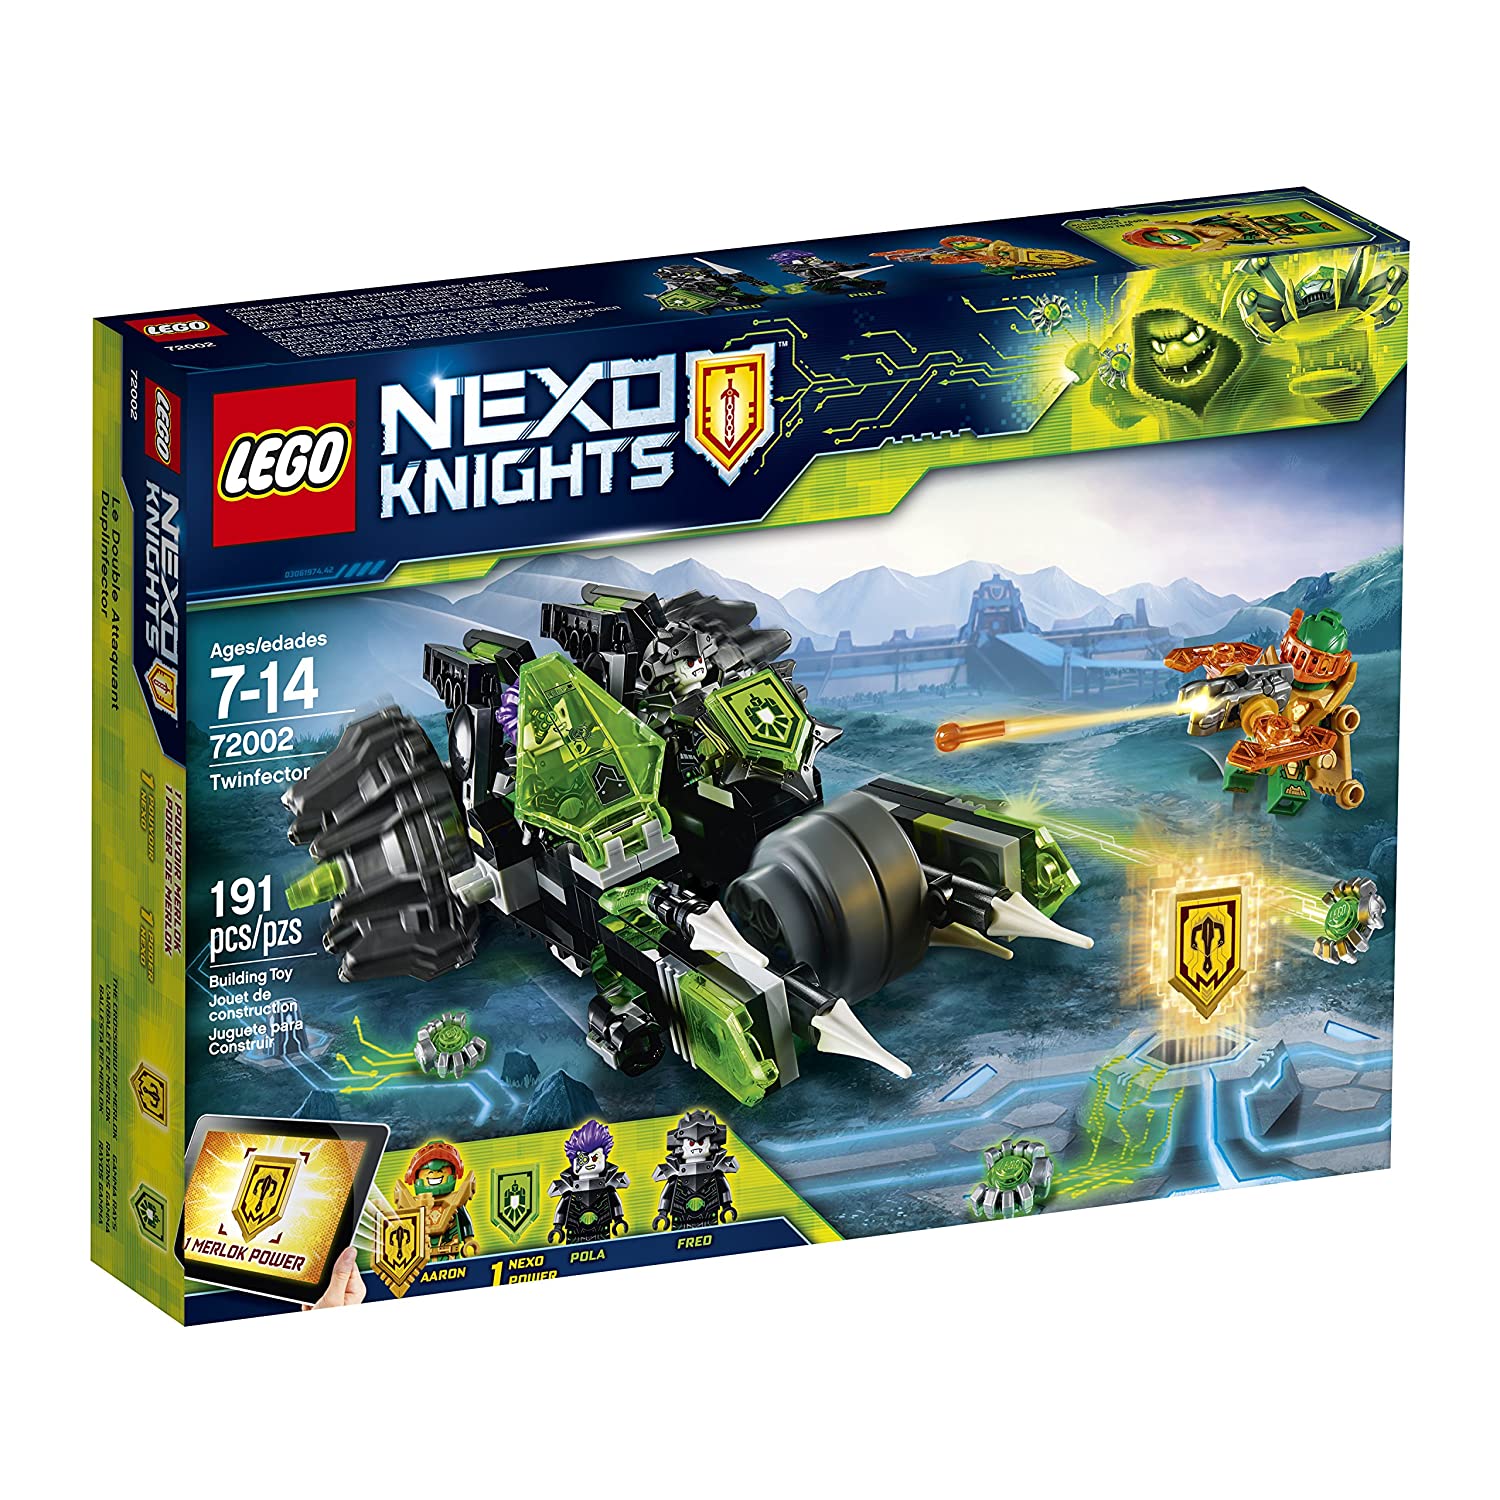 9 Best LEGO Nexo Knights Set 2022 - Buying Guide & Reviews 2